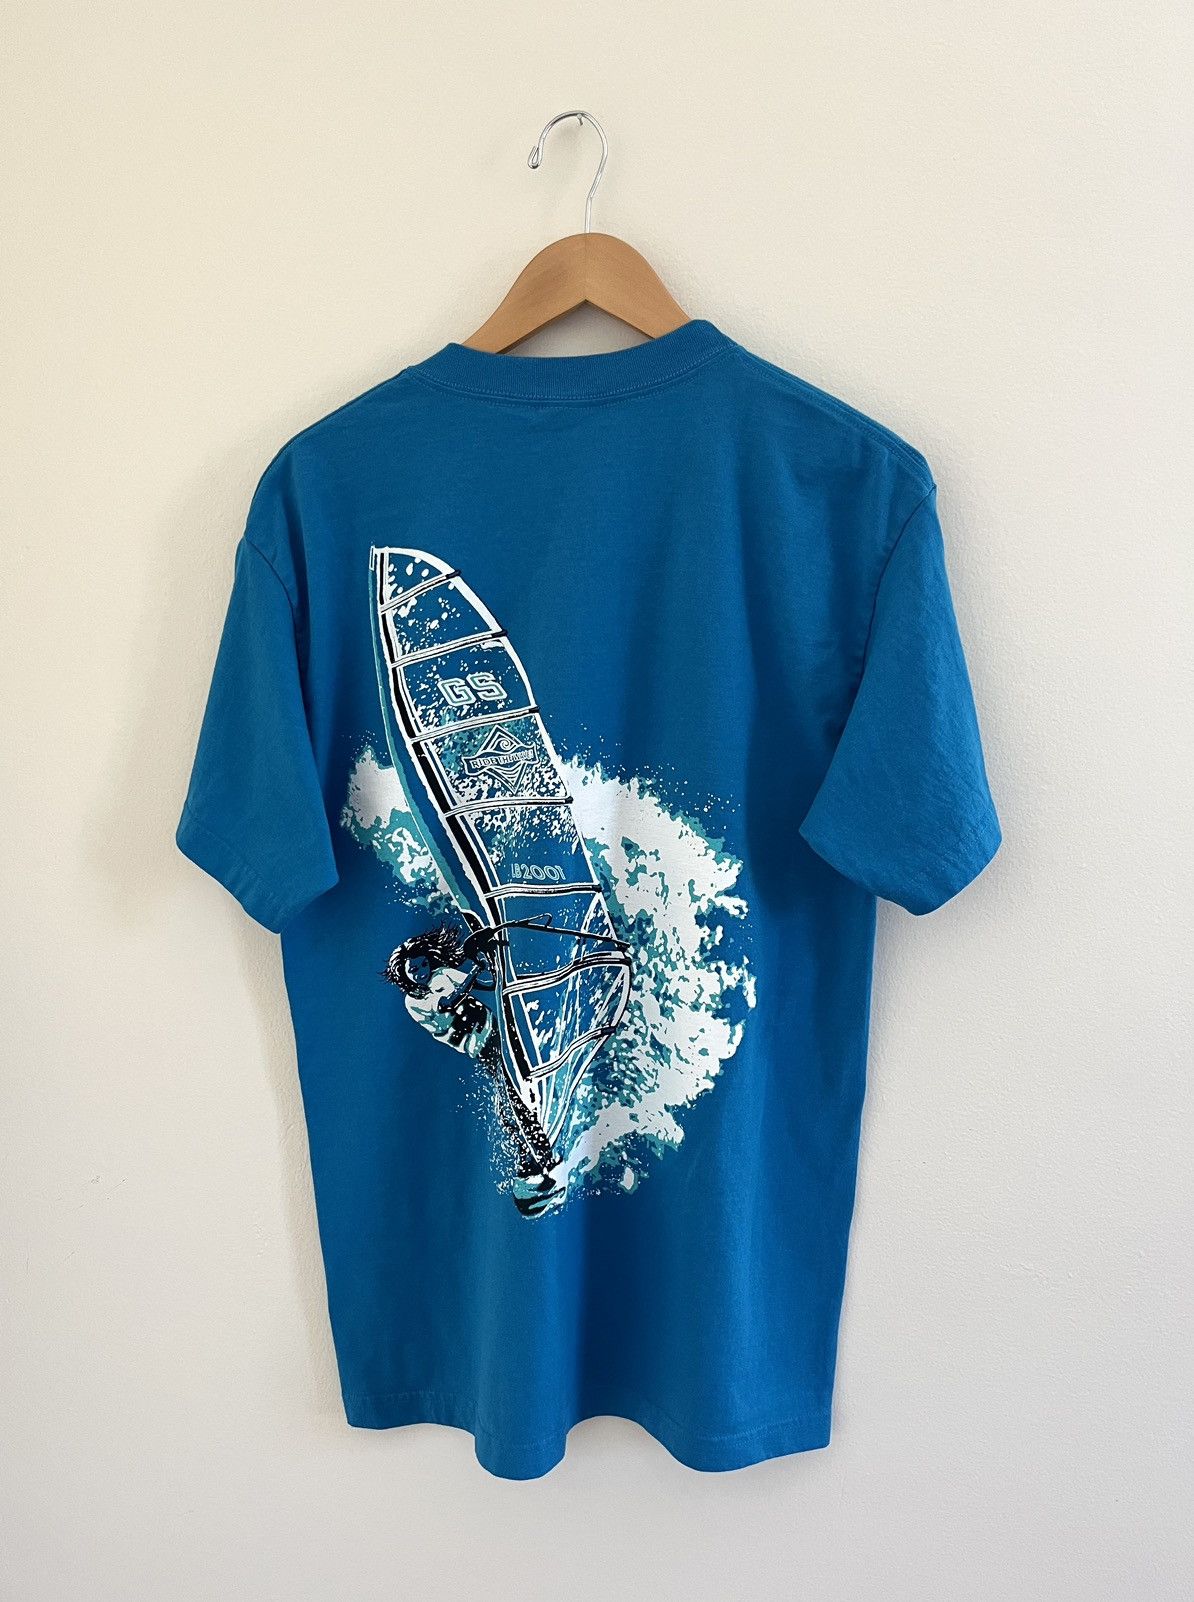 Vintage Vintage Ride The Wave Surf Style T-Shirt Little Brownies Tag Size US L / EU 52-54 / 3 - 1 Preview